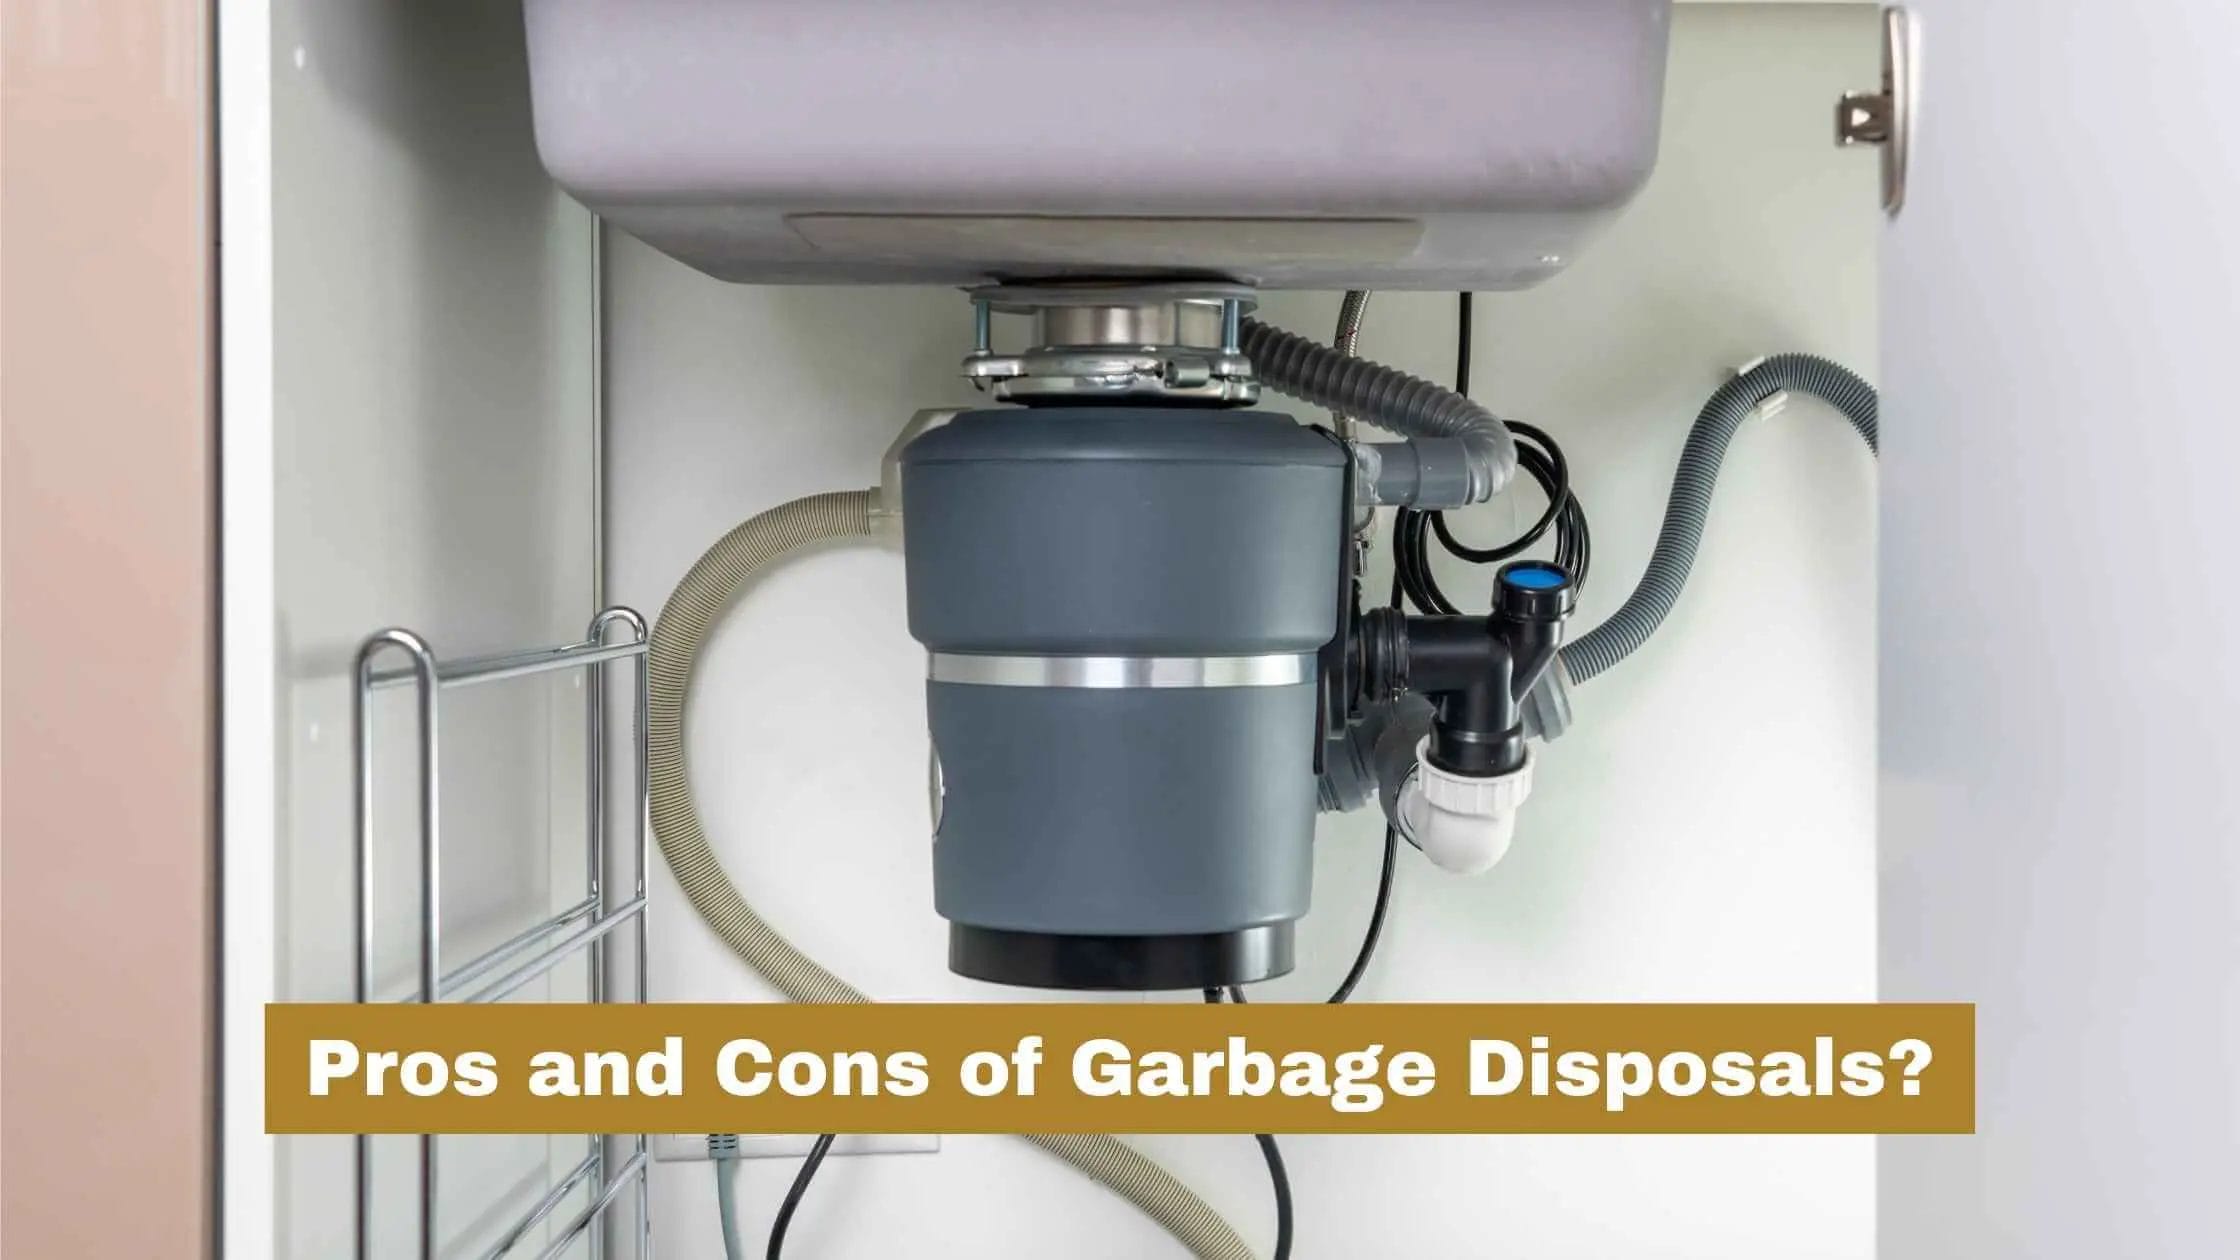 Pros and Cons of Garbage Disposals